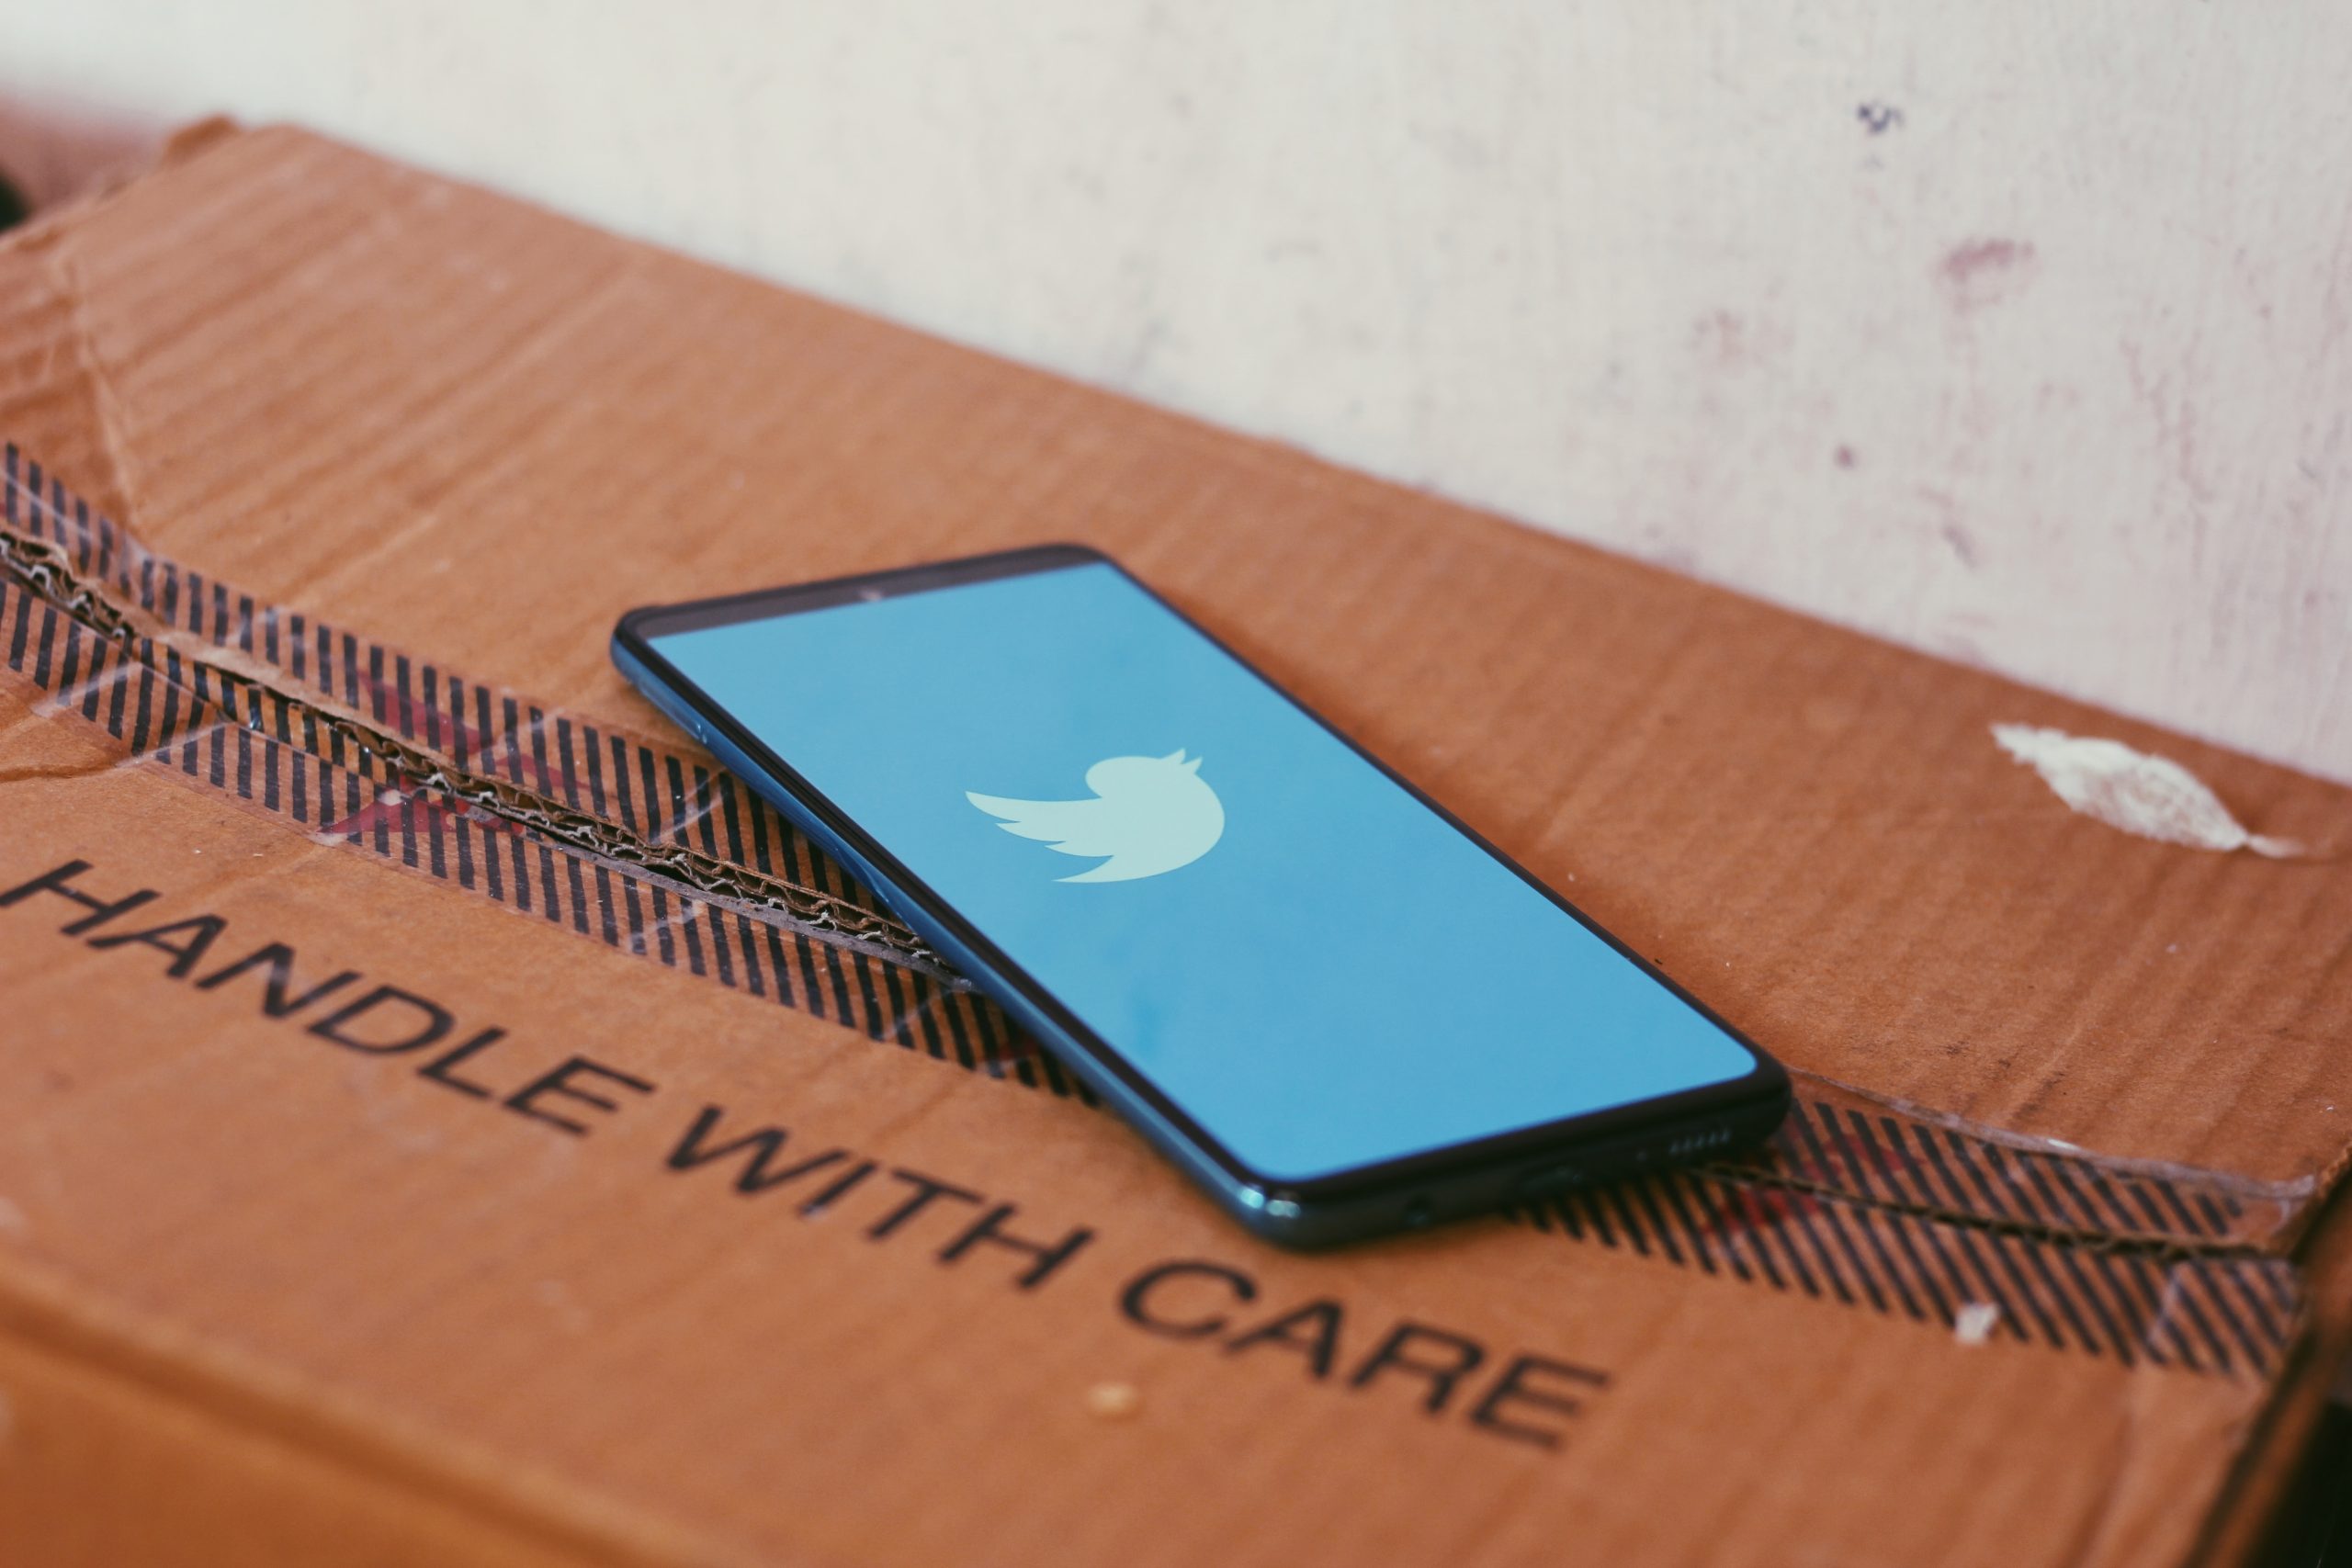 A smartphone lying on a carton that reads ‘Handle with care’ while the phone’s screen has twitter’s symbol. Social Media Impact on Mental Health.